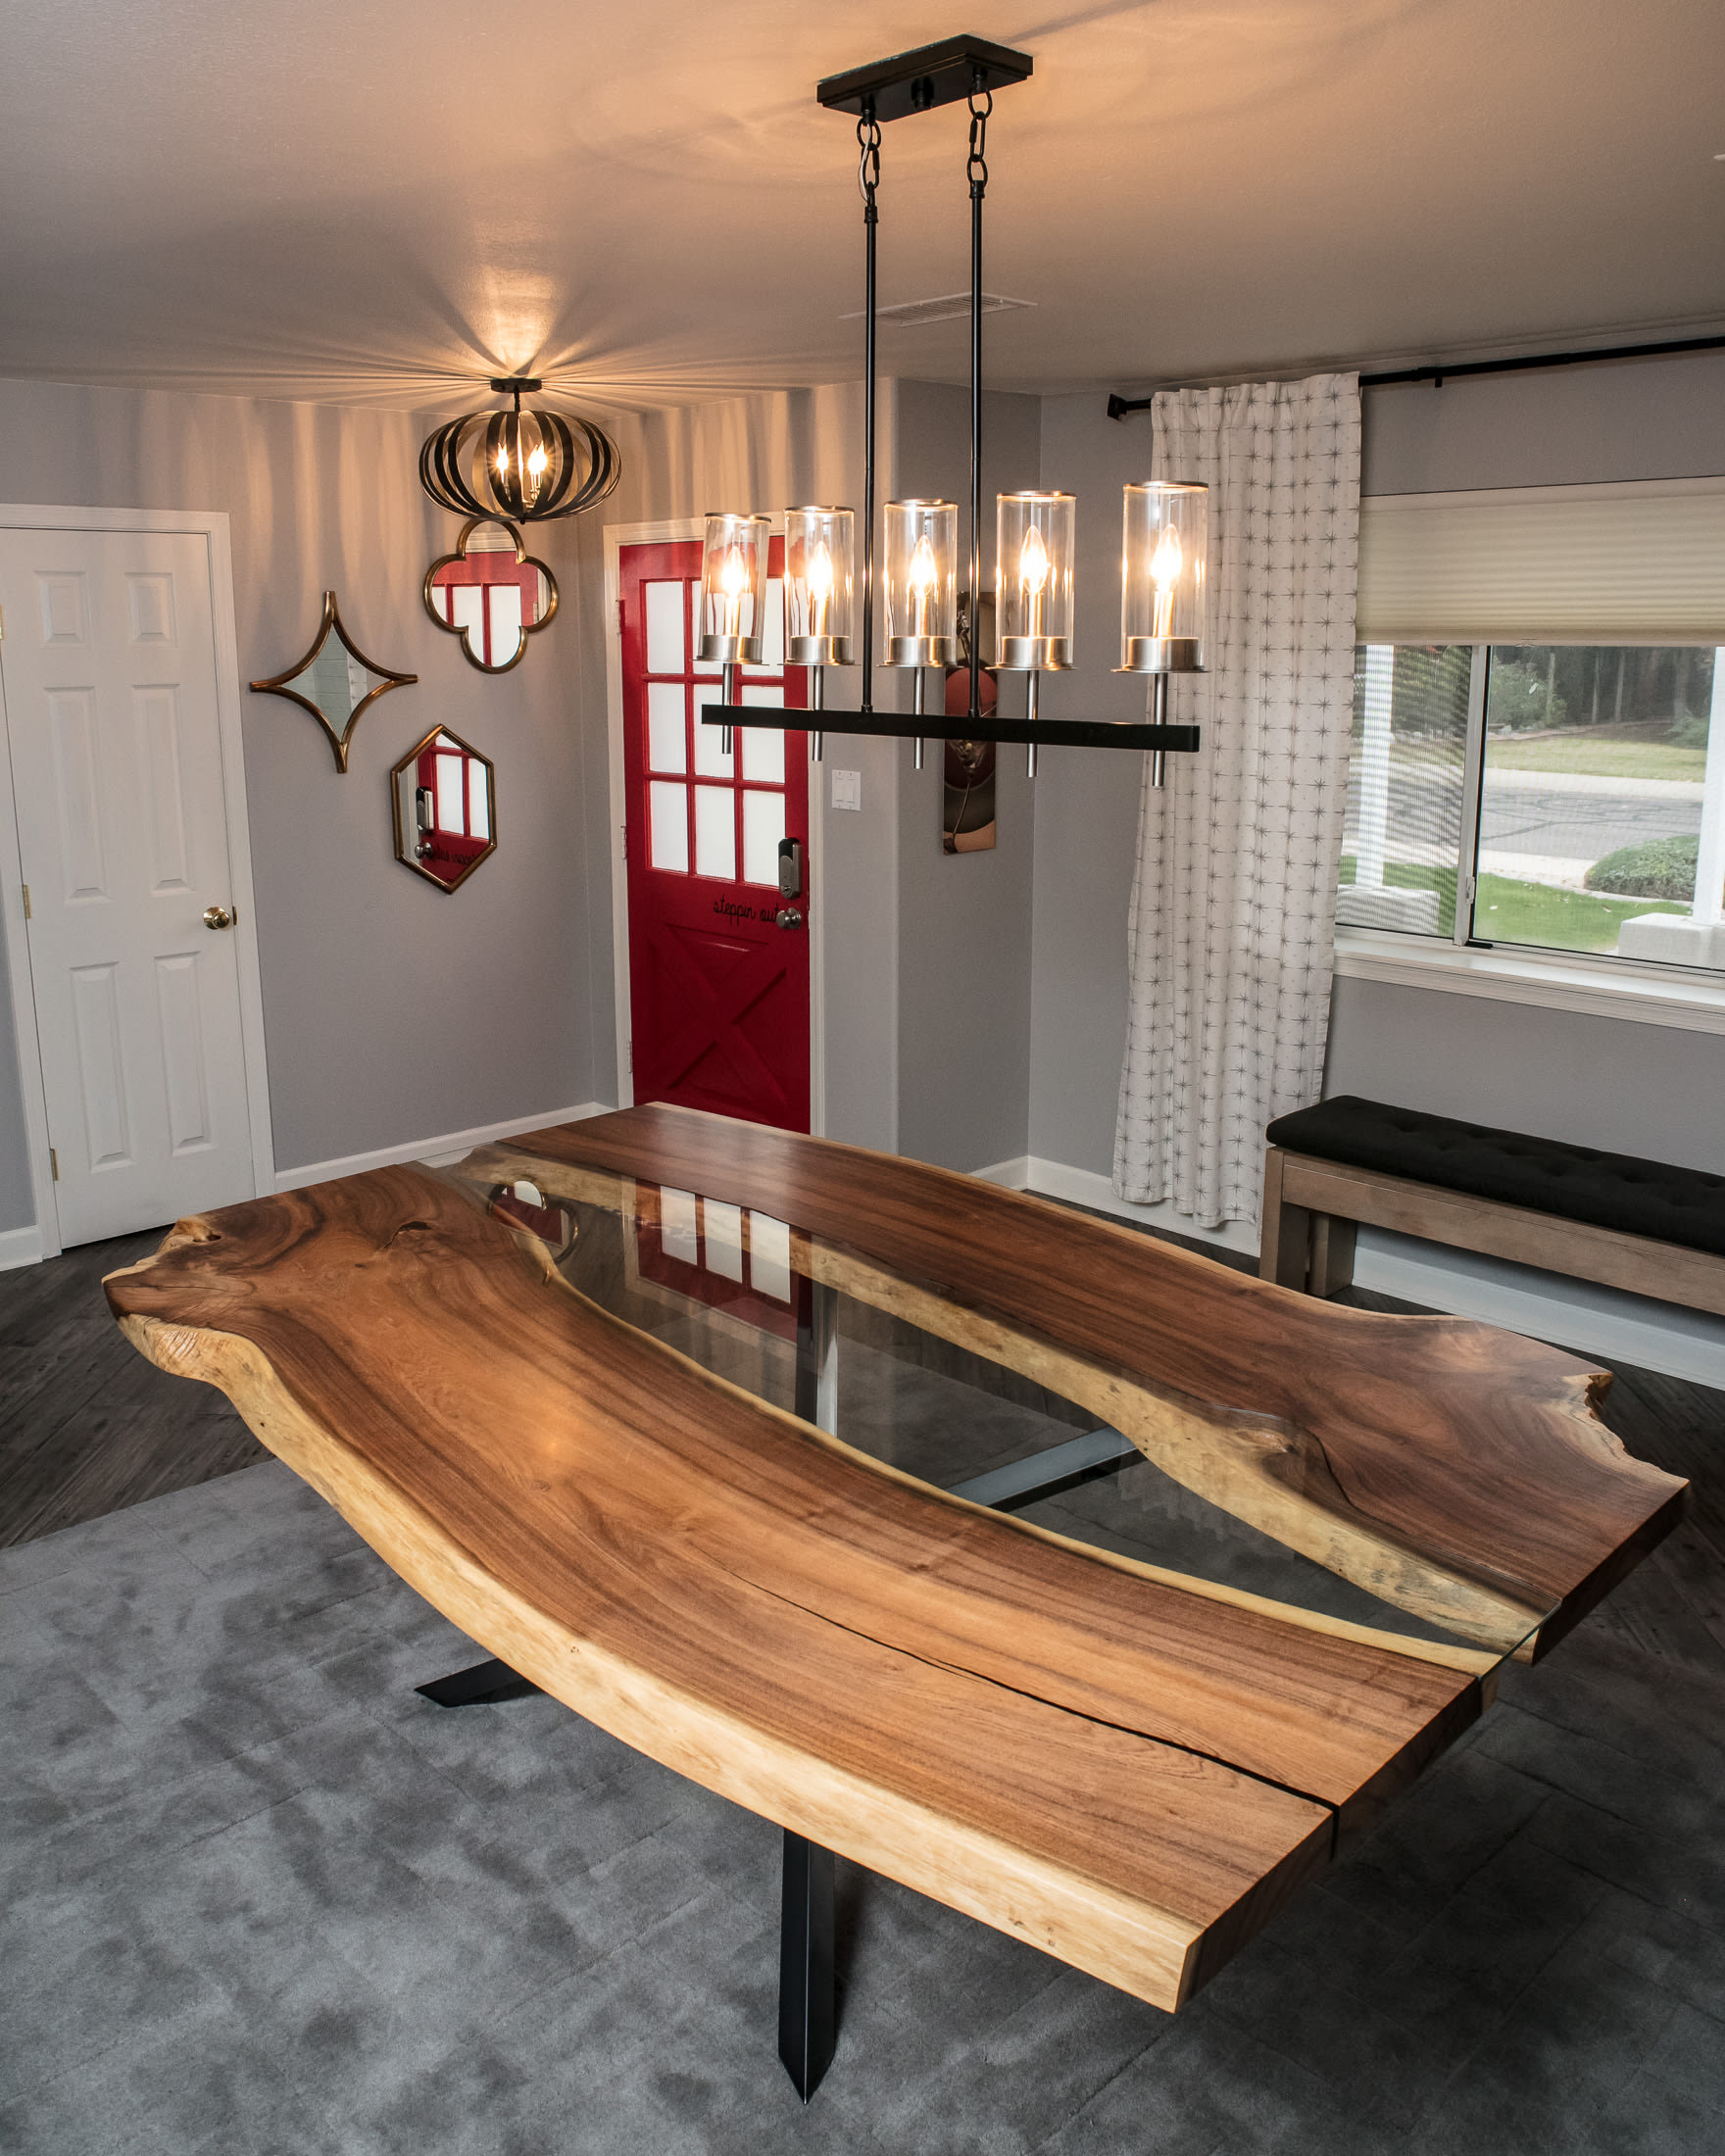 Mesquite Live Edge River Table by Lumberlust Designs at Private